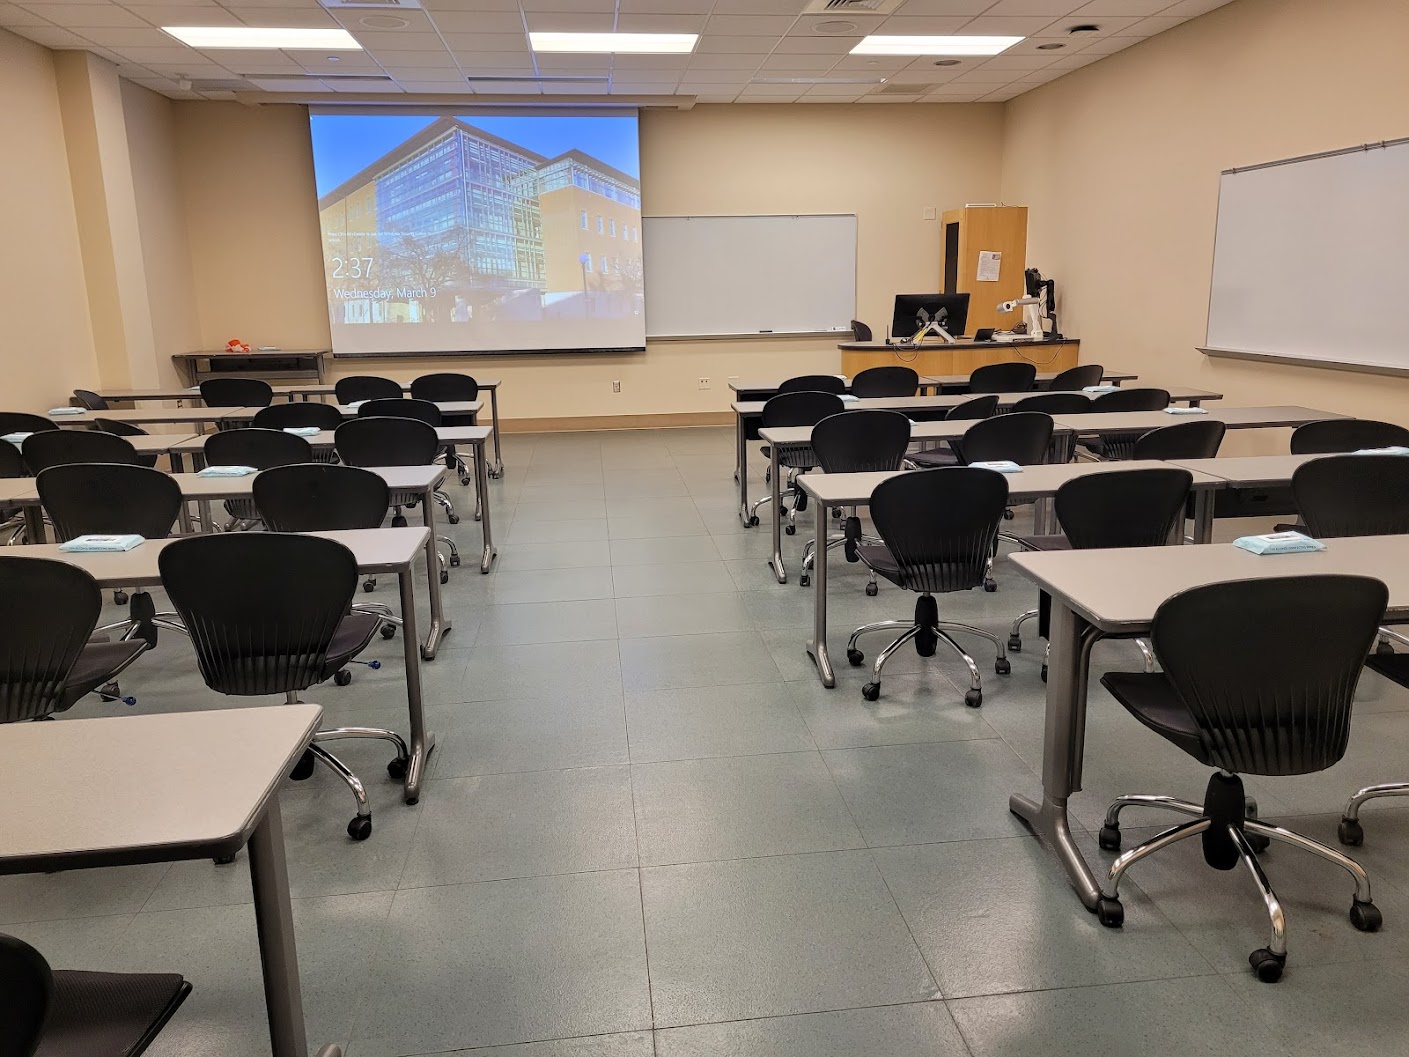 A view of the classroom with movable tables and chairs, whiteboards, and instructor table in front.